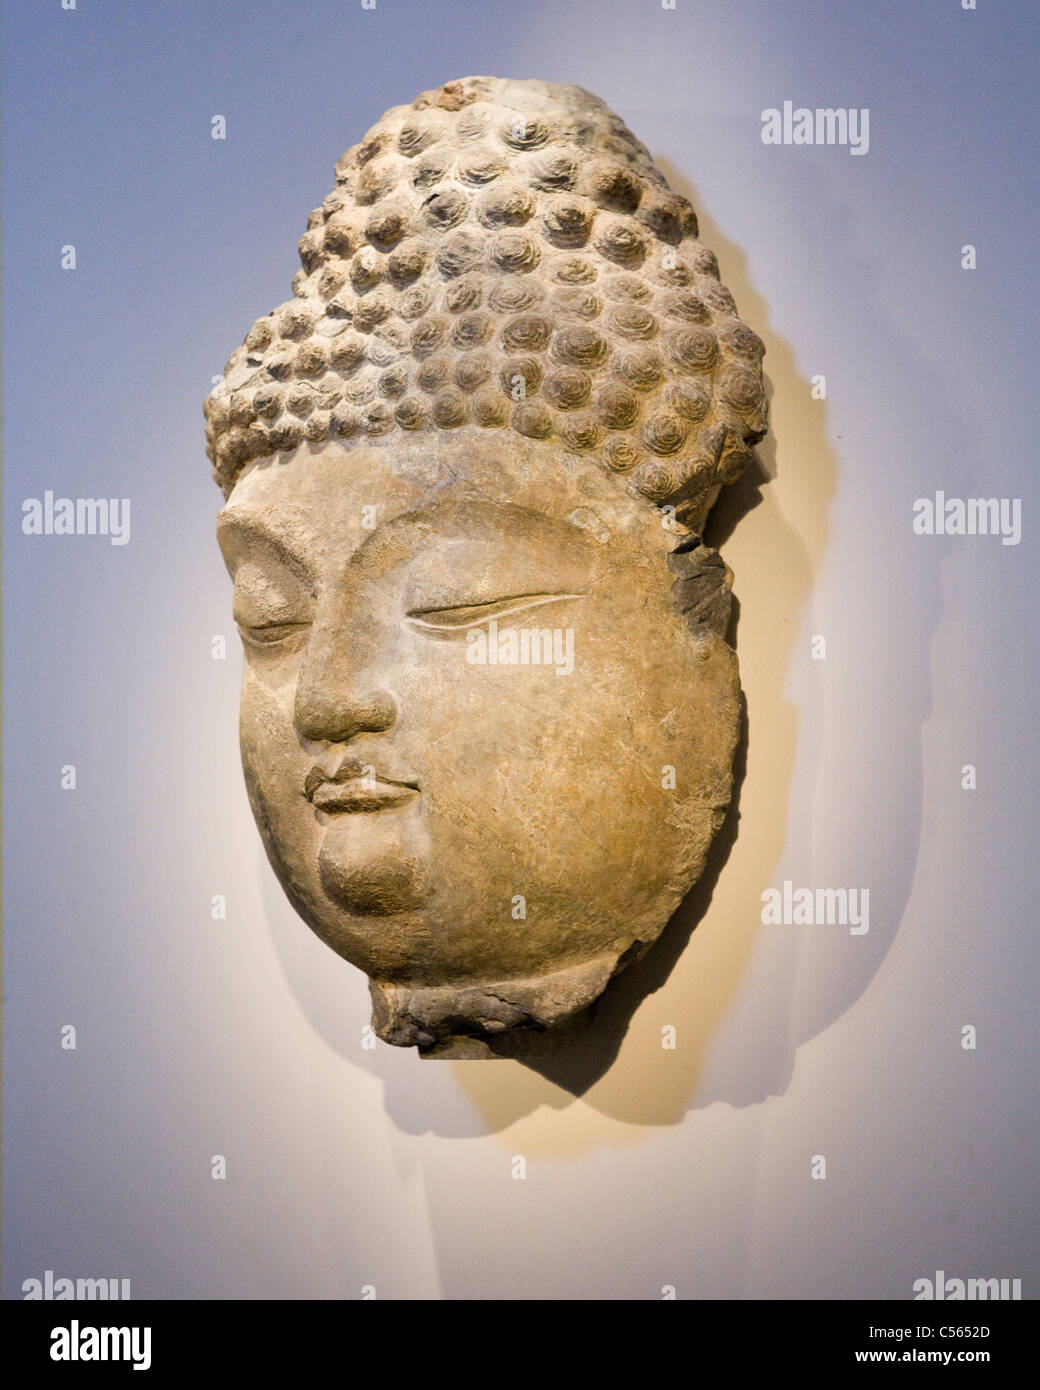 Stone sculpture of Buddha hanging on wall Stock Photo